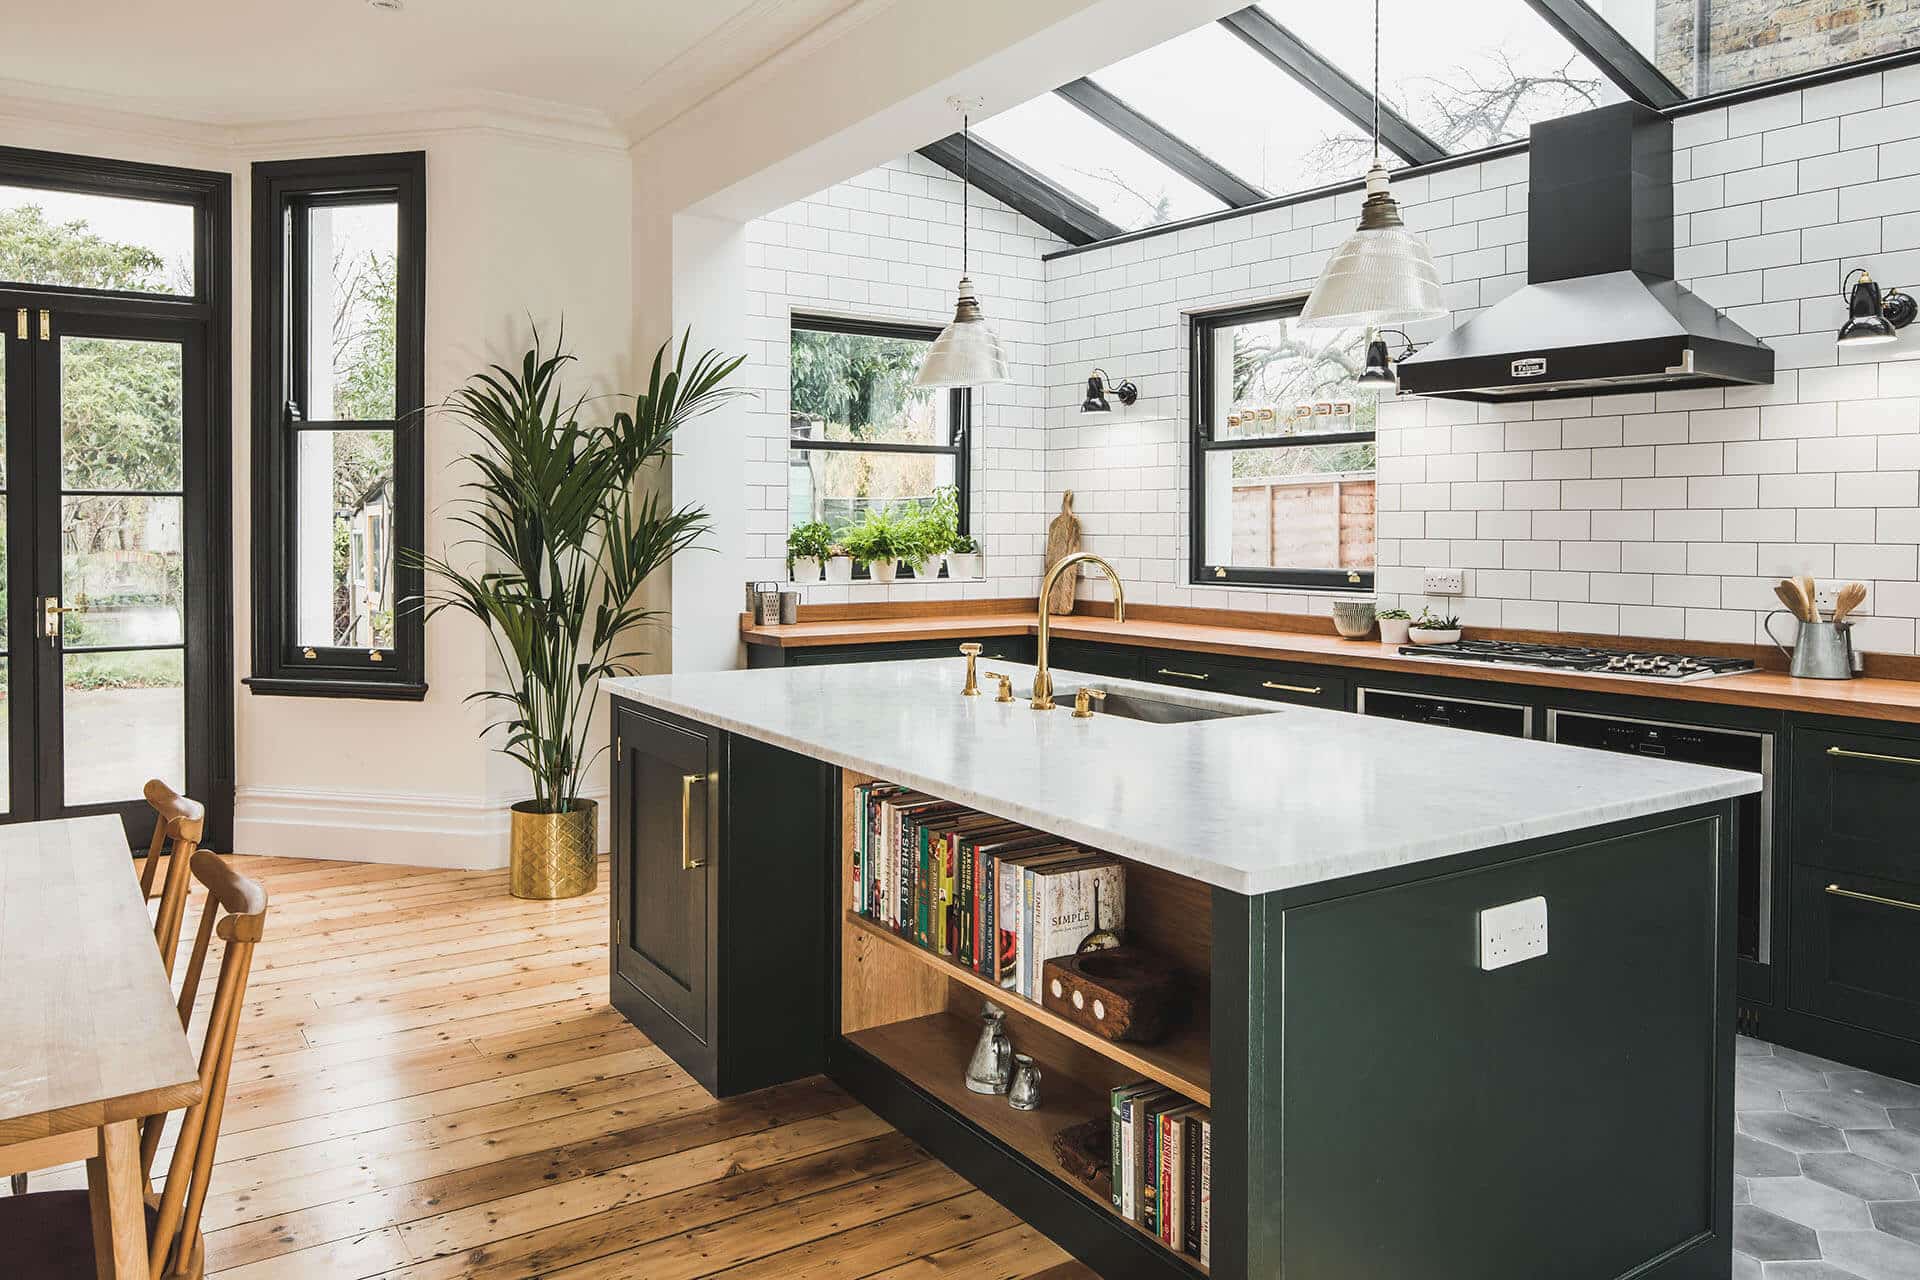 8 kitchen design trends for 2019 | sustainable kitchens